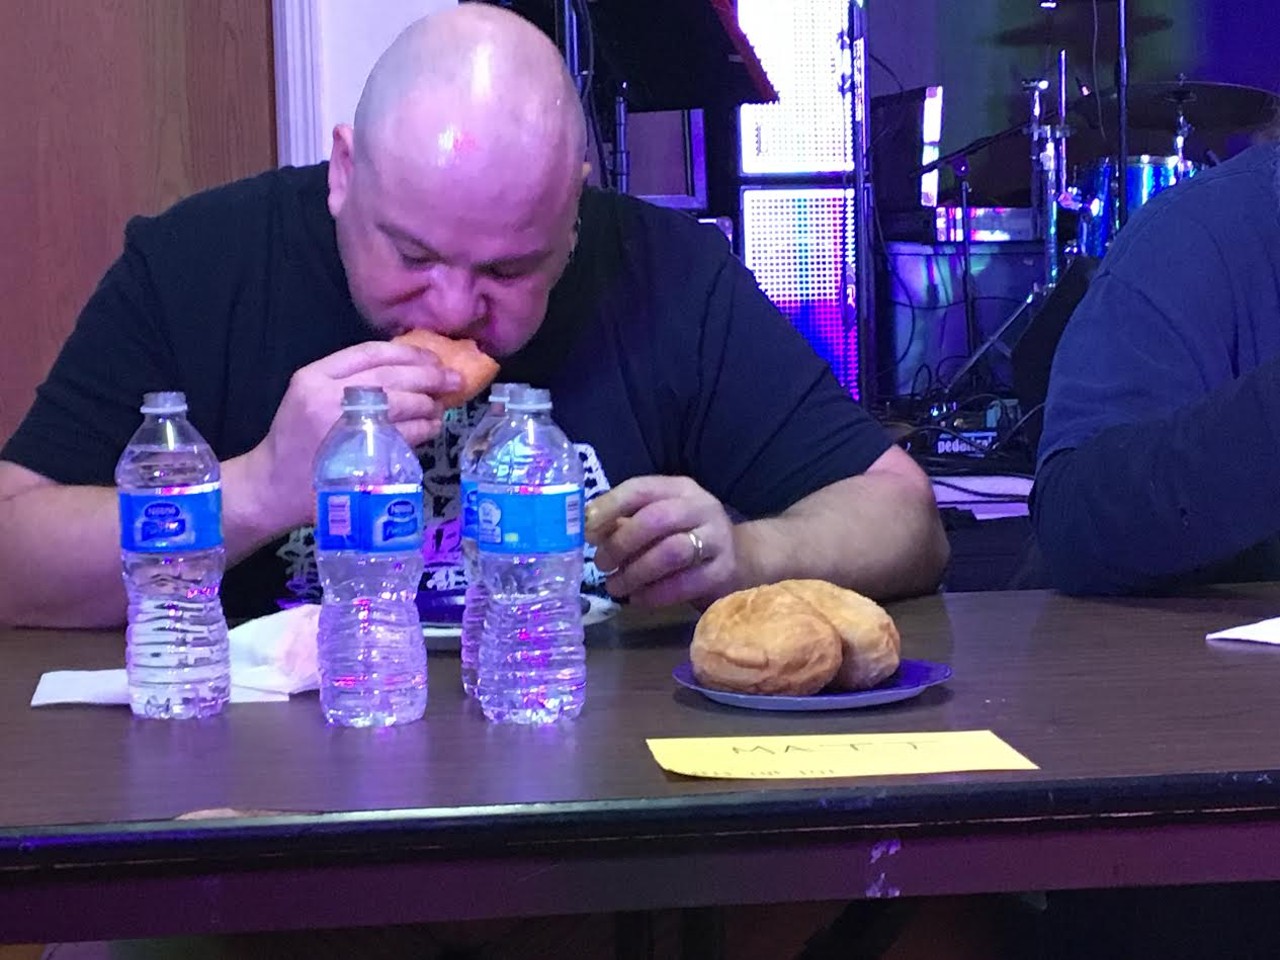 15 gluttonous photos from the paczki eating contest in Hamtramck